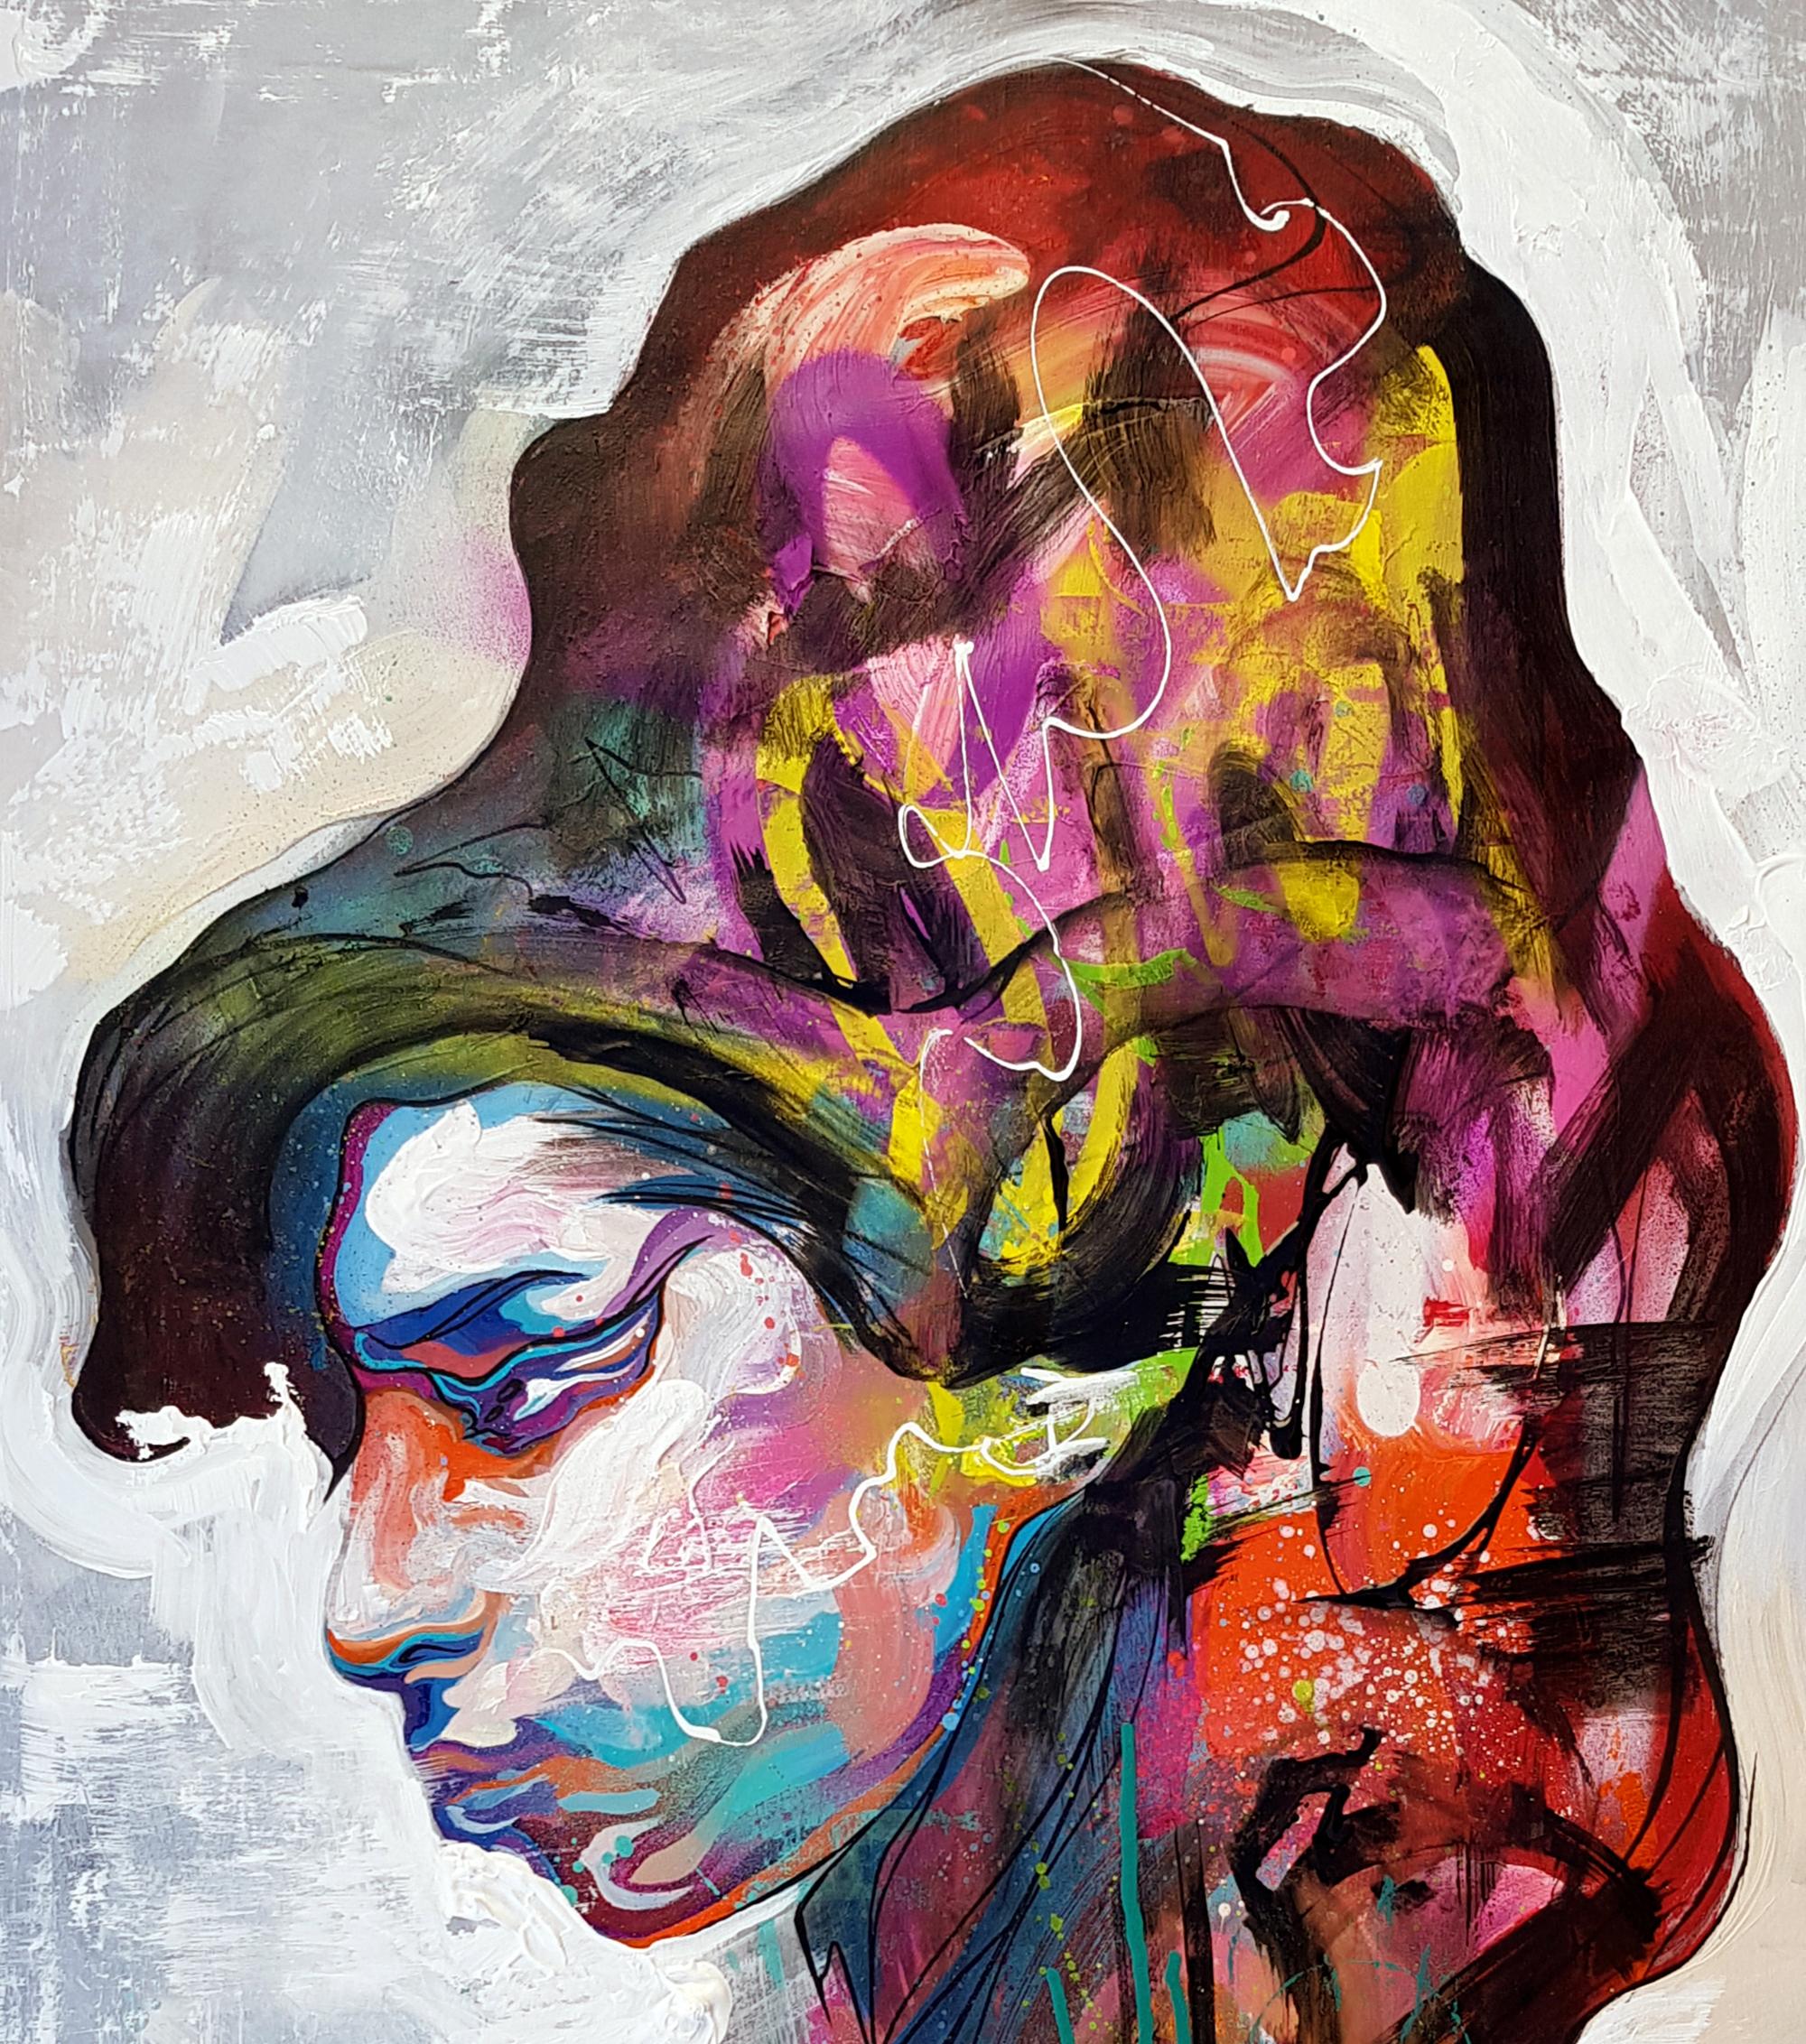 Amy - 21st Century, Contemporary Painting, Portrait, Amy Winehouse, Graffiti - Gray Portrait Painting by Danny O'Connor